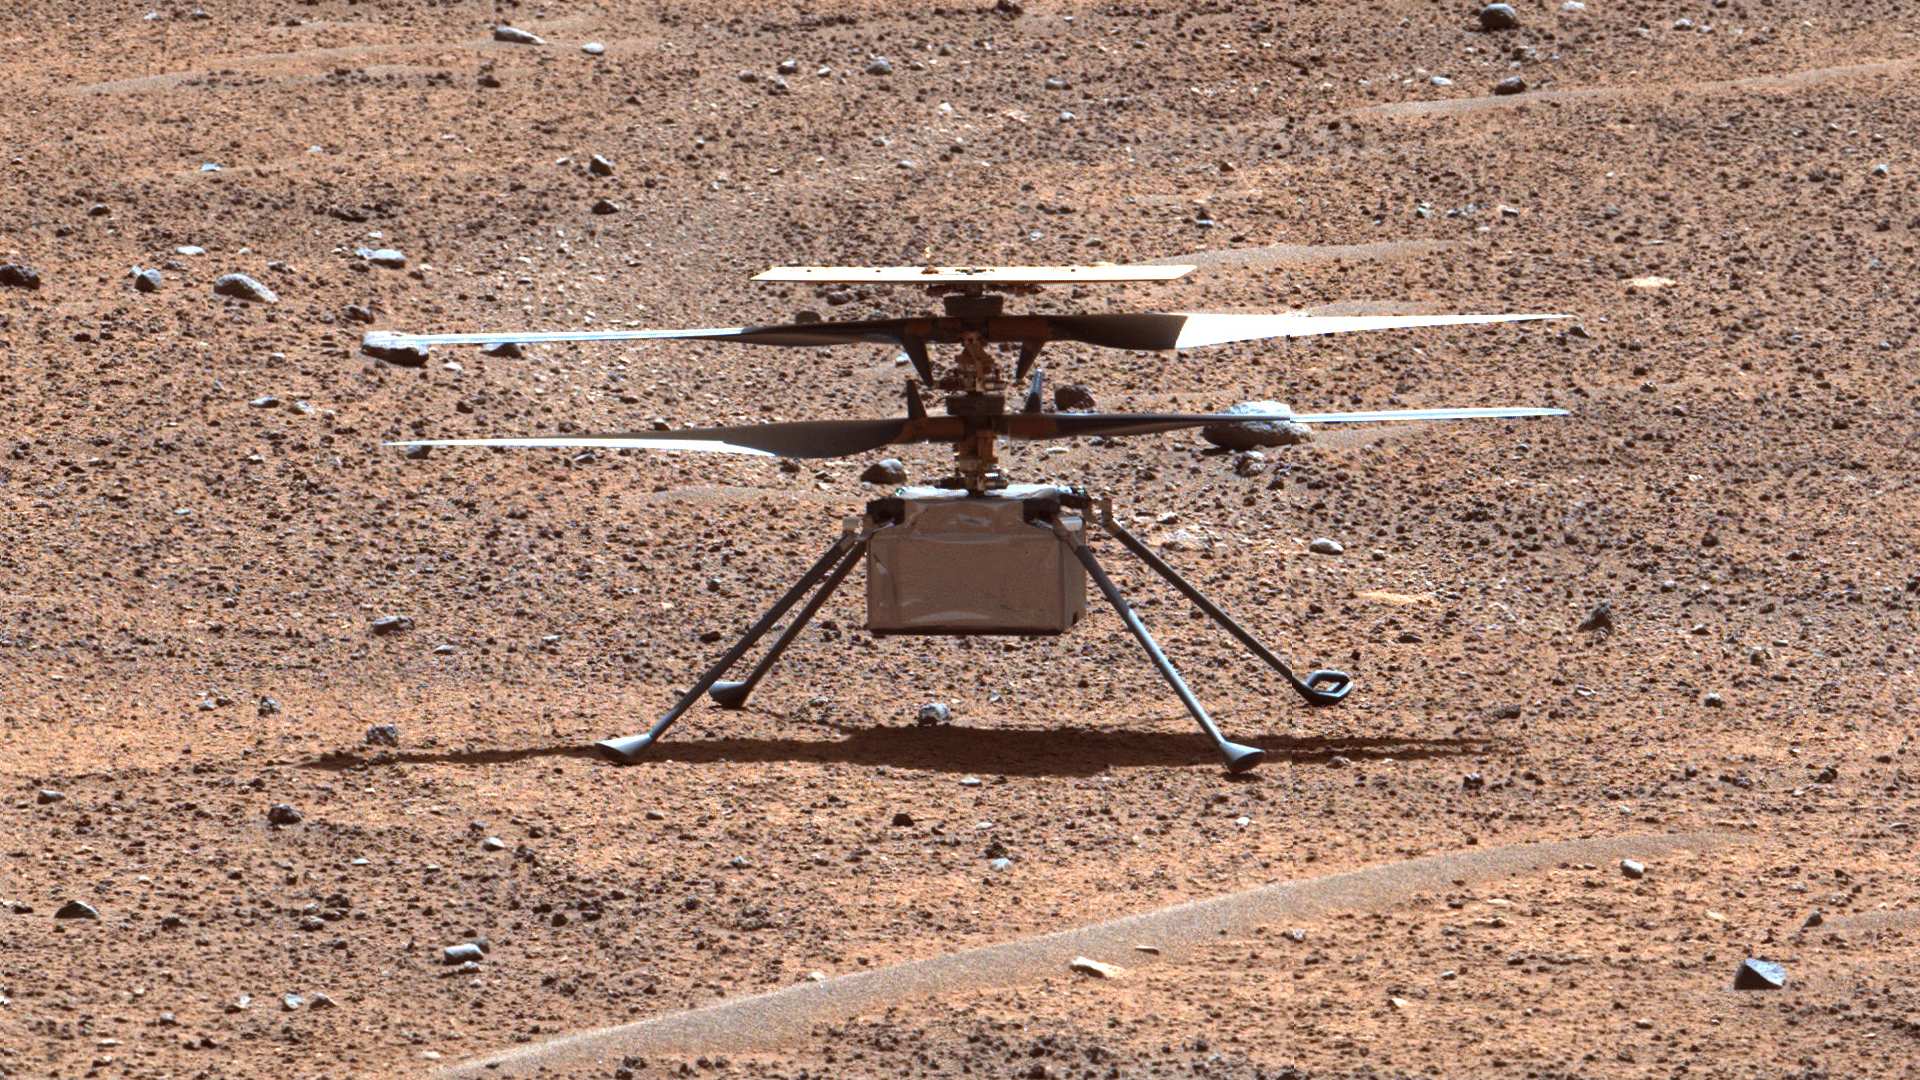 NASA’s Ingenuity Mars Helicopter Gets Grounded After 72 Flights